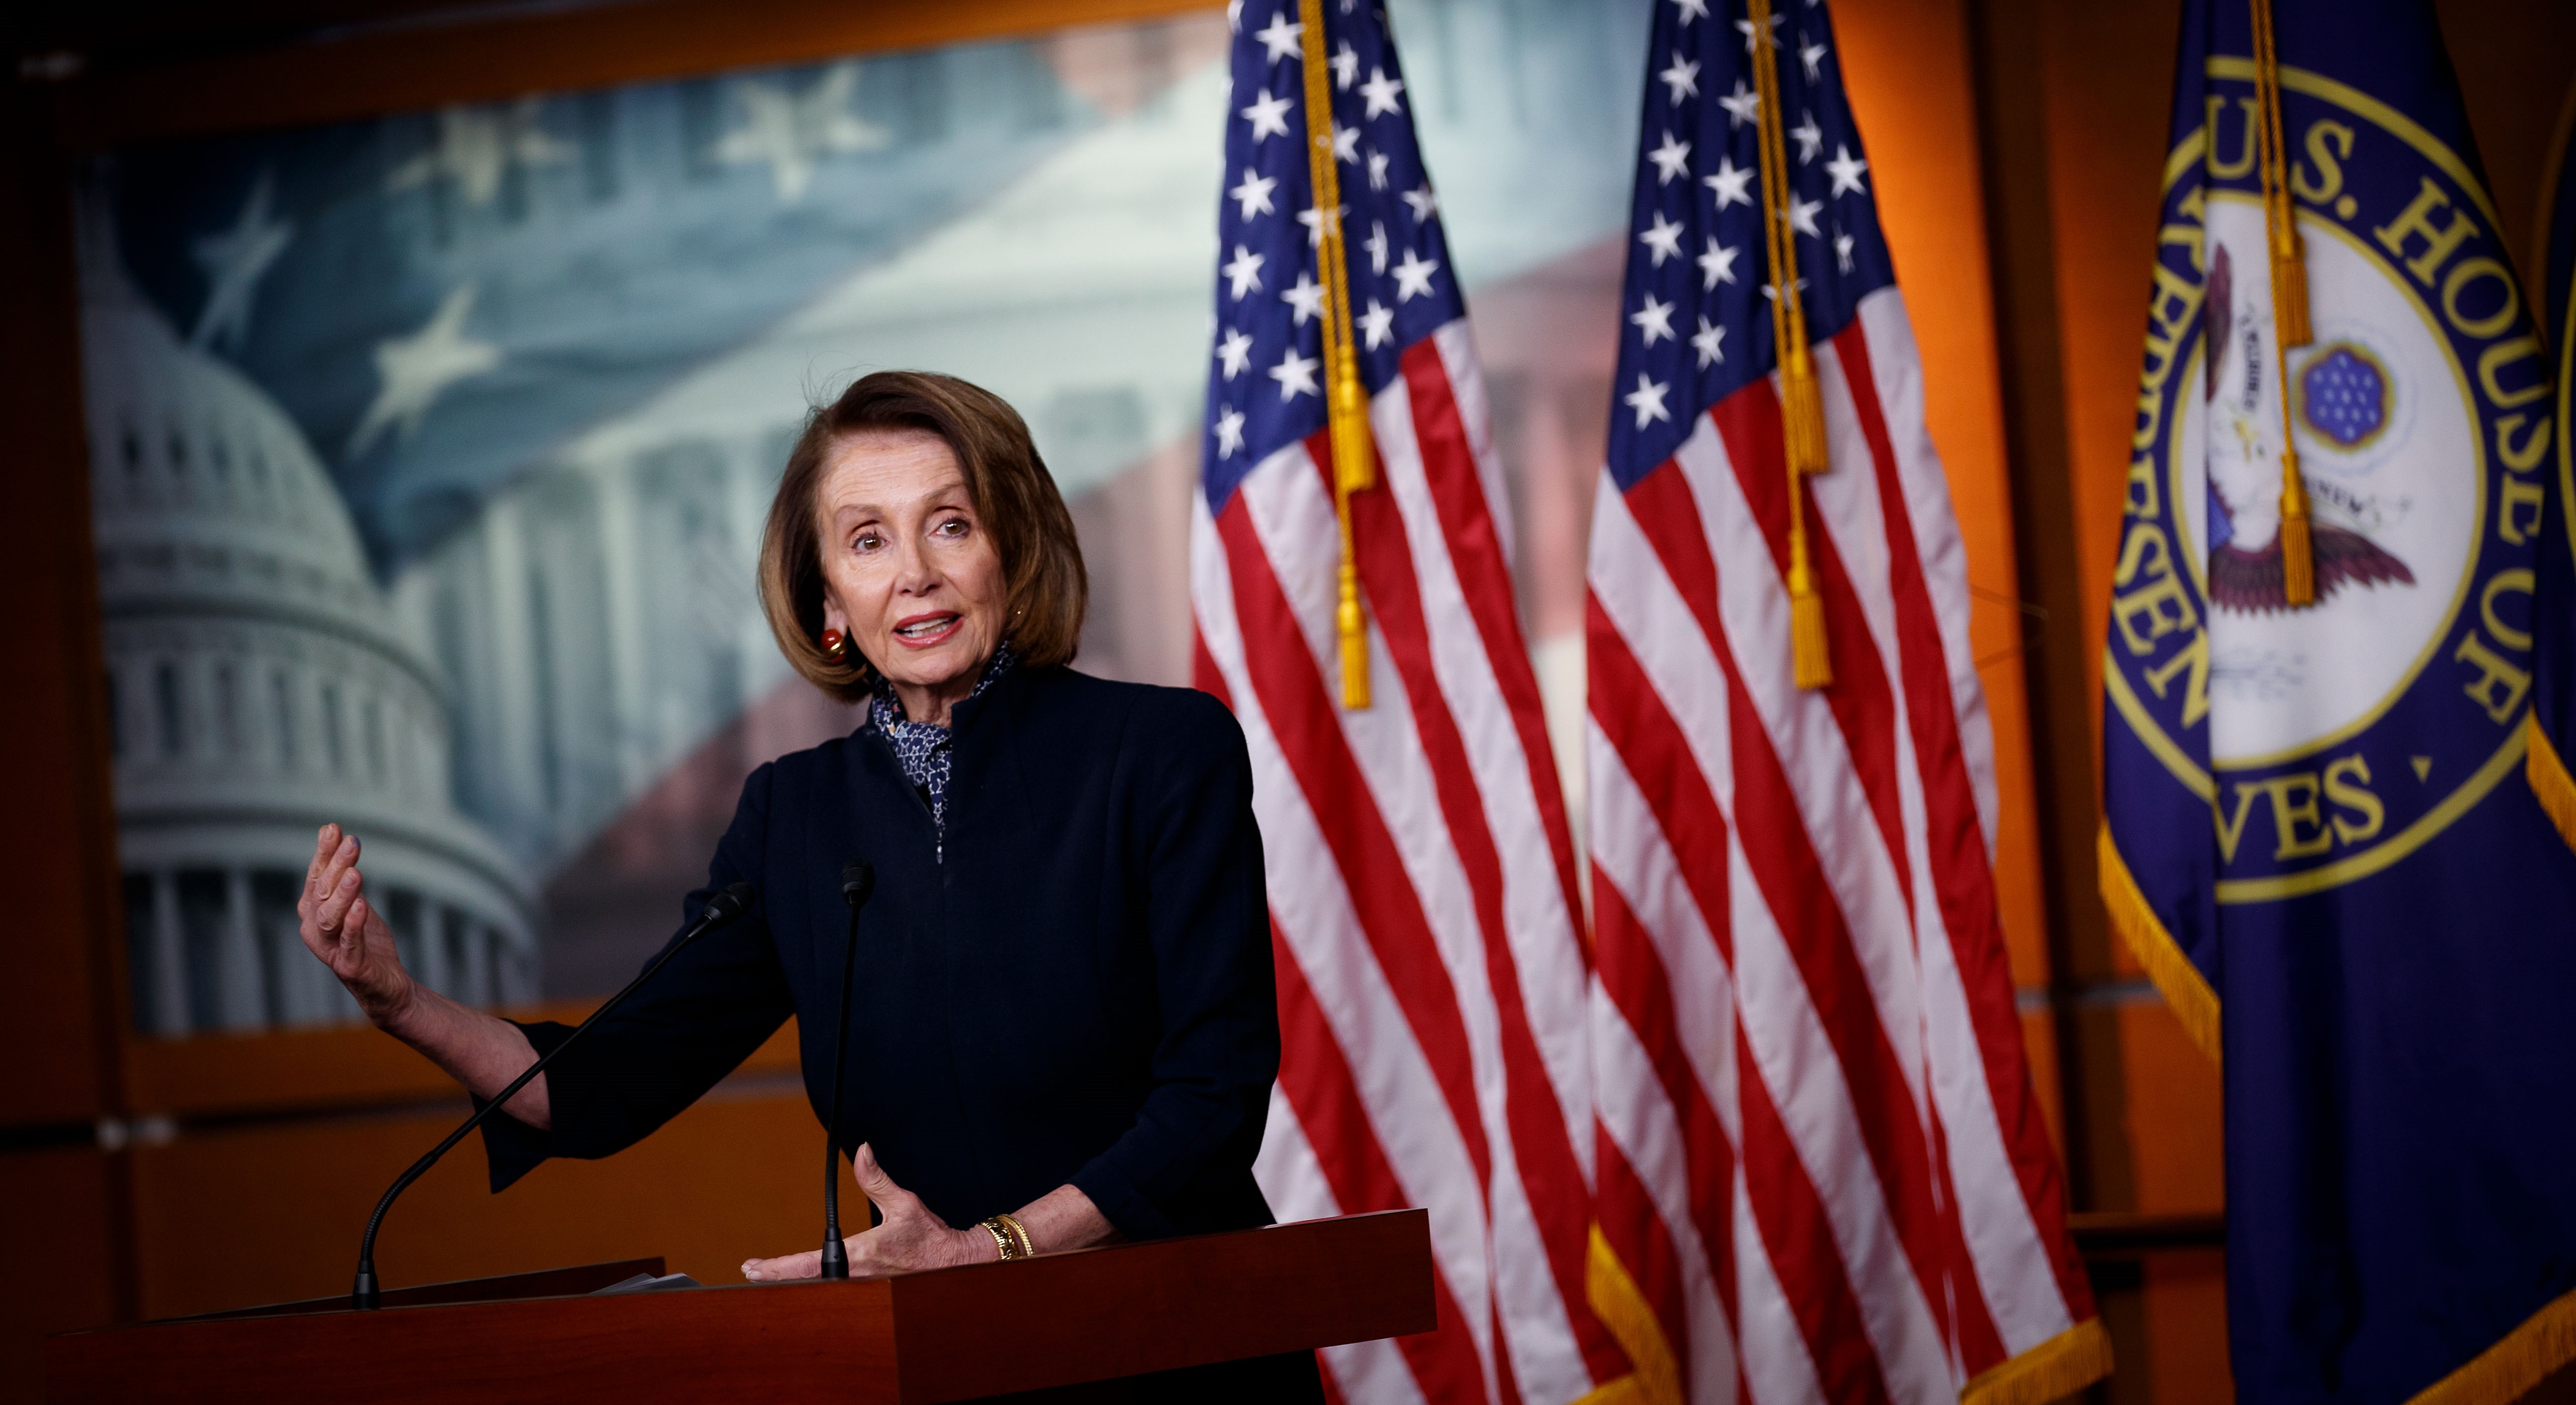 Pelosi says Russia, not Iran, is the villain in election meddling accusation